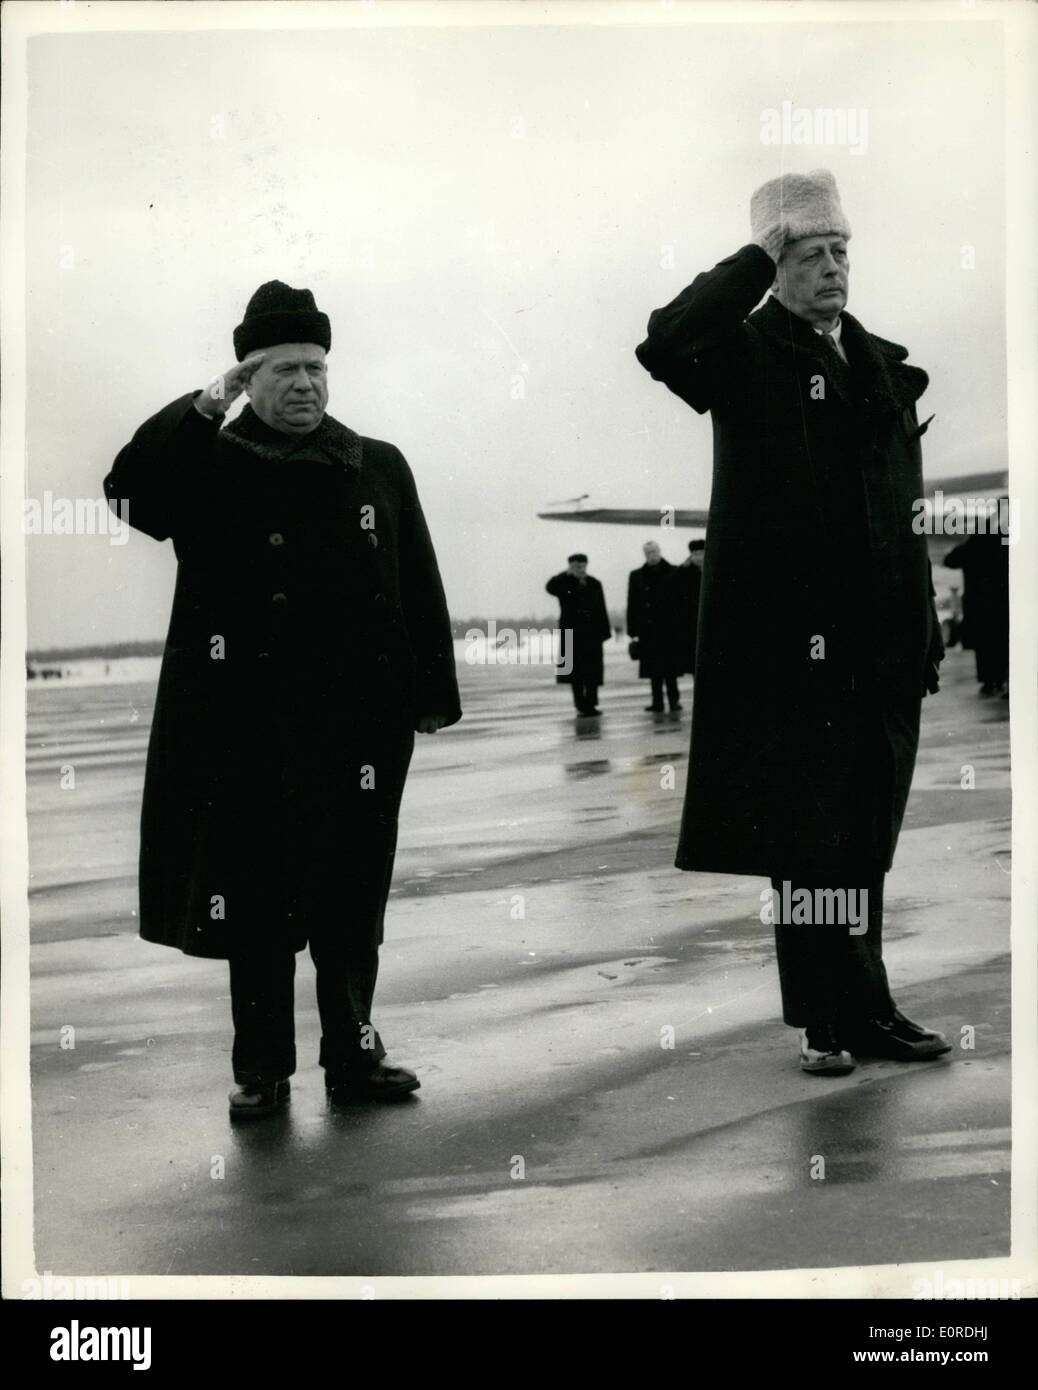 Feb. 02, 1959 - Mr. MacMillan in Moscow. Photo Shows: Mr. Harold MacMillan, (right), seen wearing a white furry hat, salutes with Mr. Kruschev, shortly after Mr. MacMillan's arrival at Moscow Airport on Saturday, after flying from London. Stock Photo